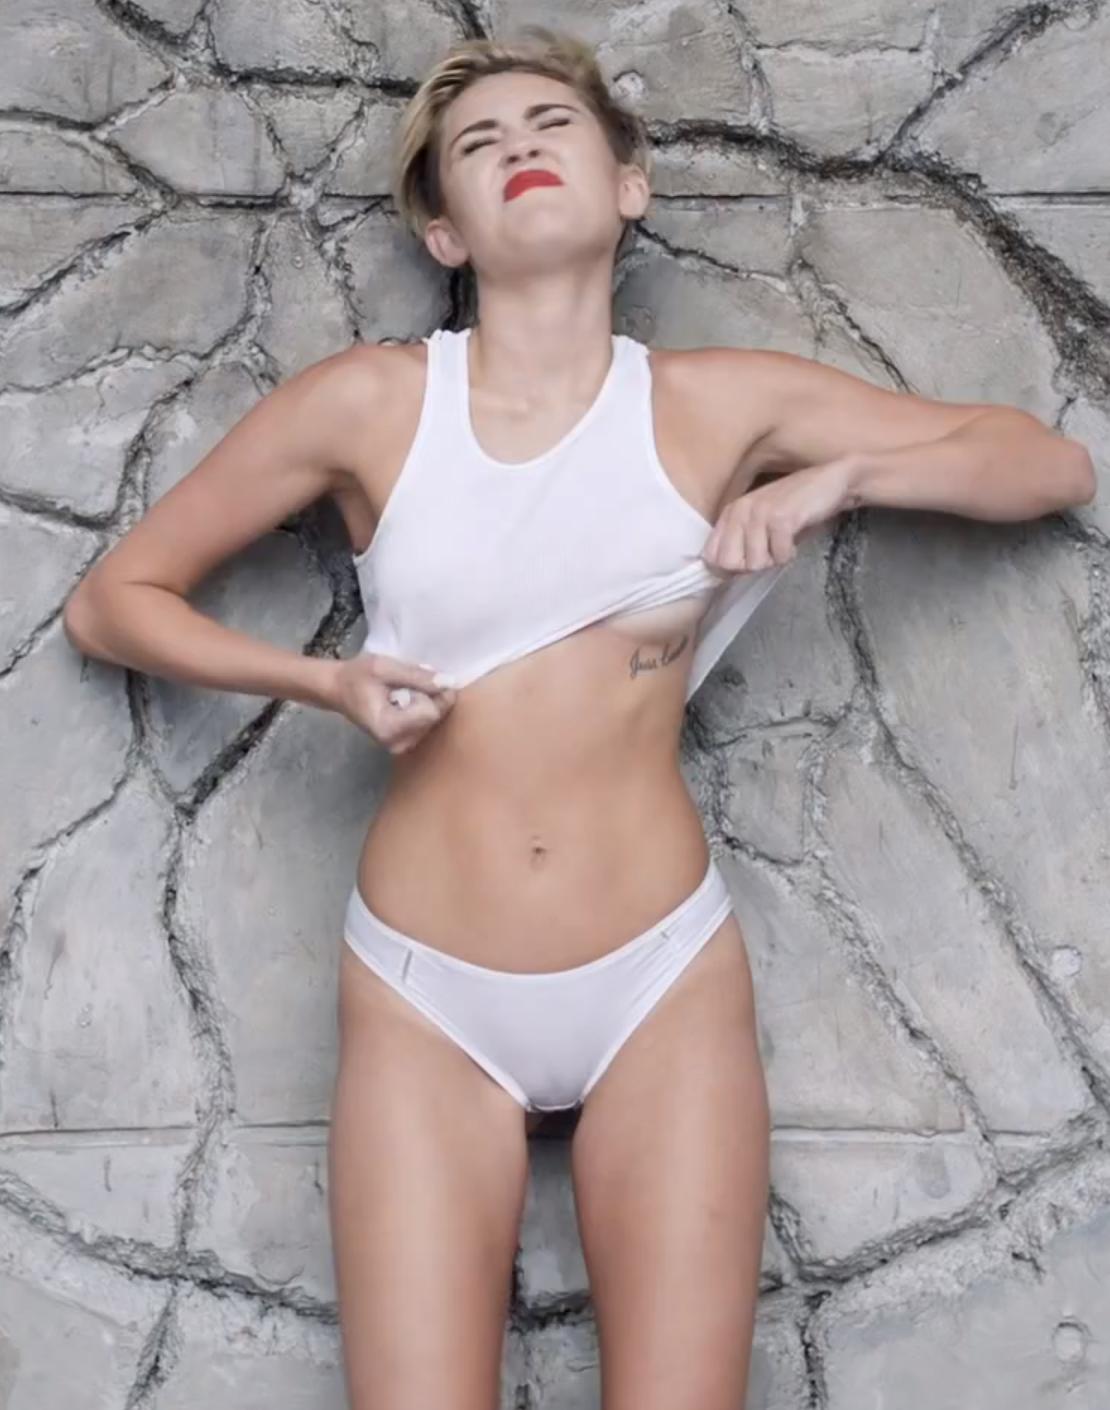 miley cyrus camel toe pictures